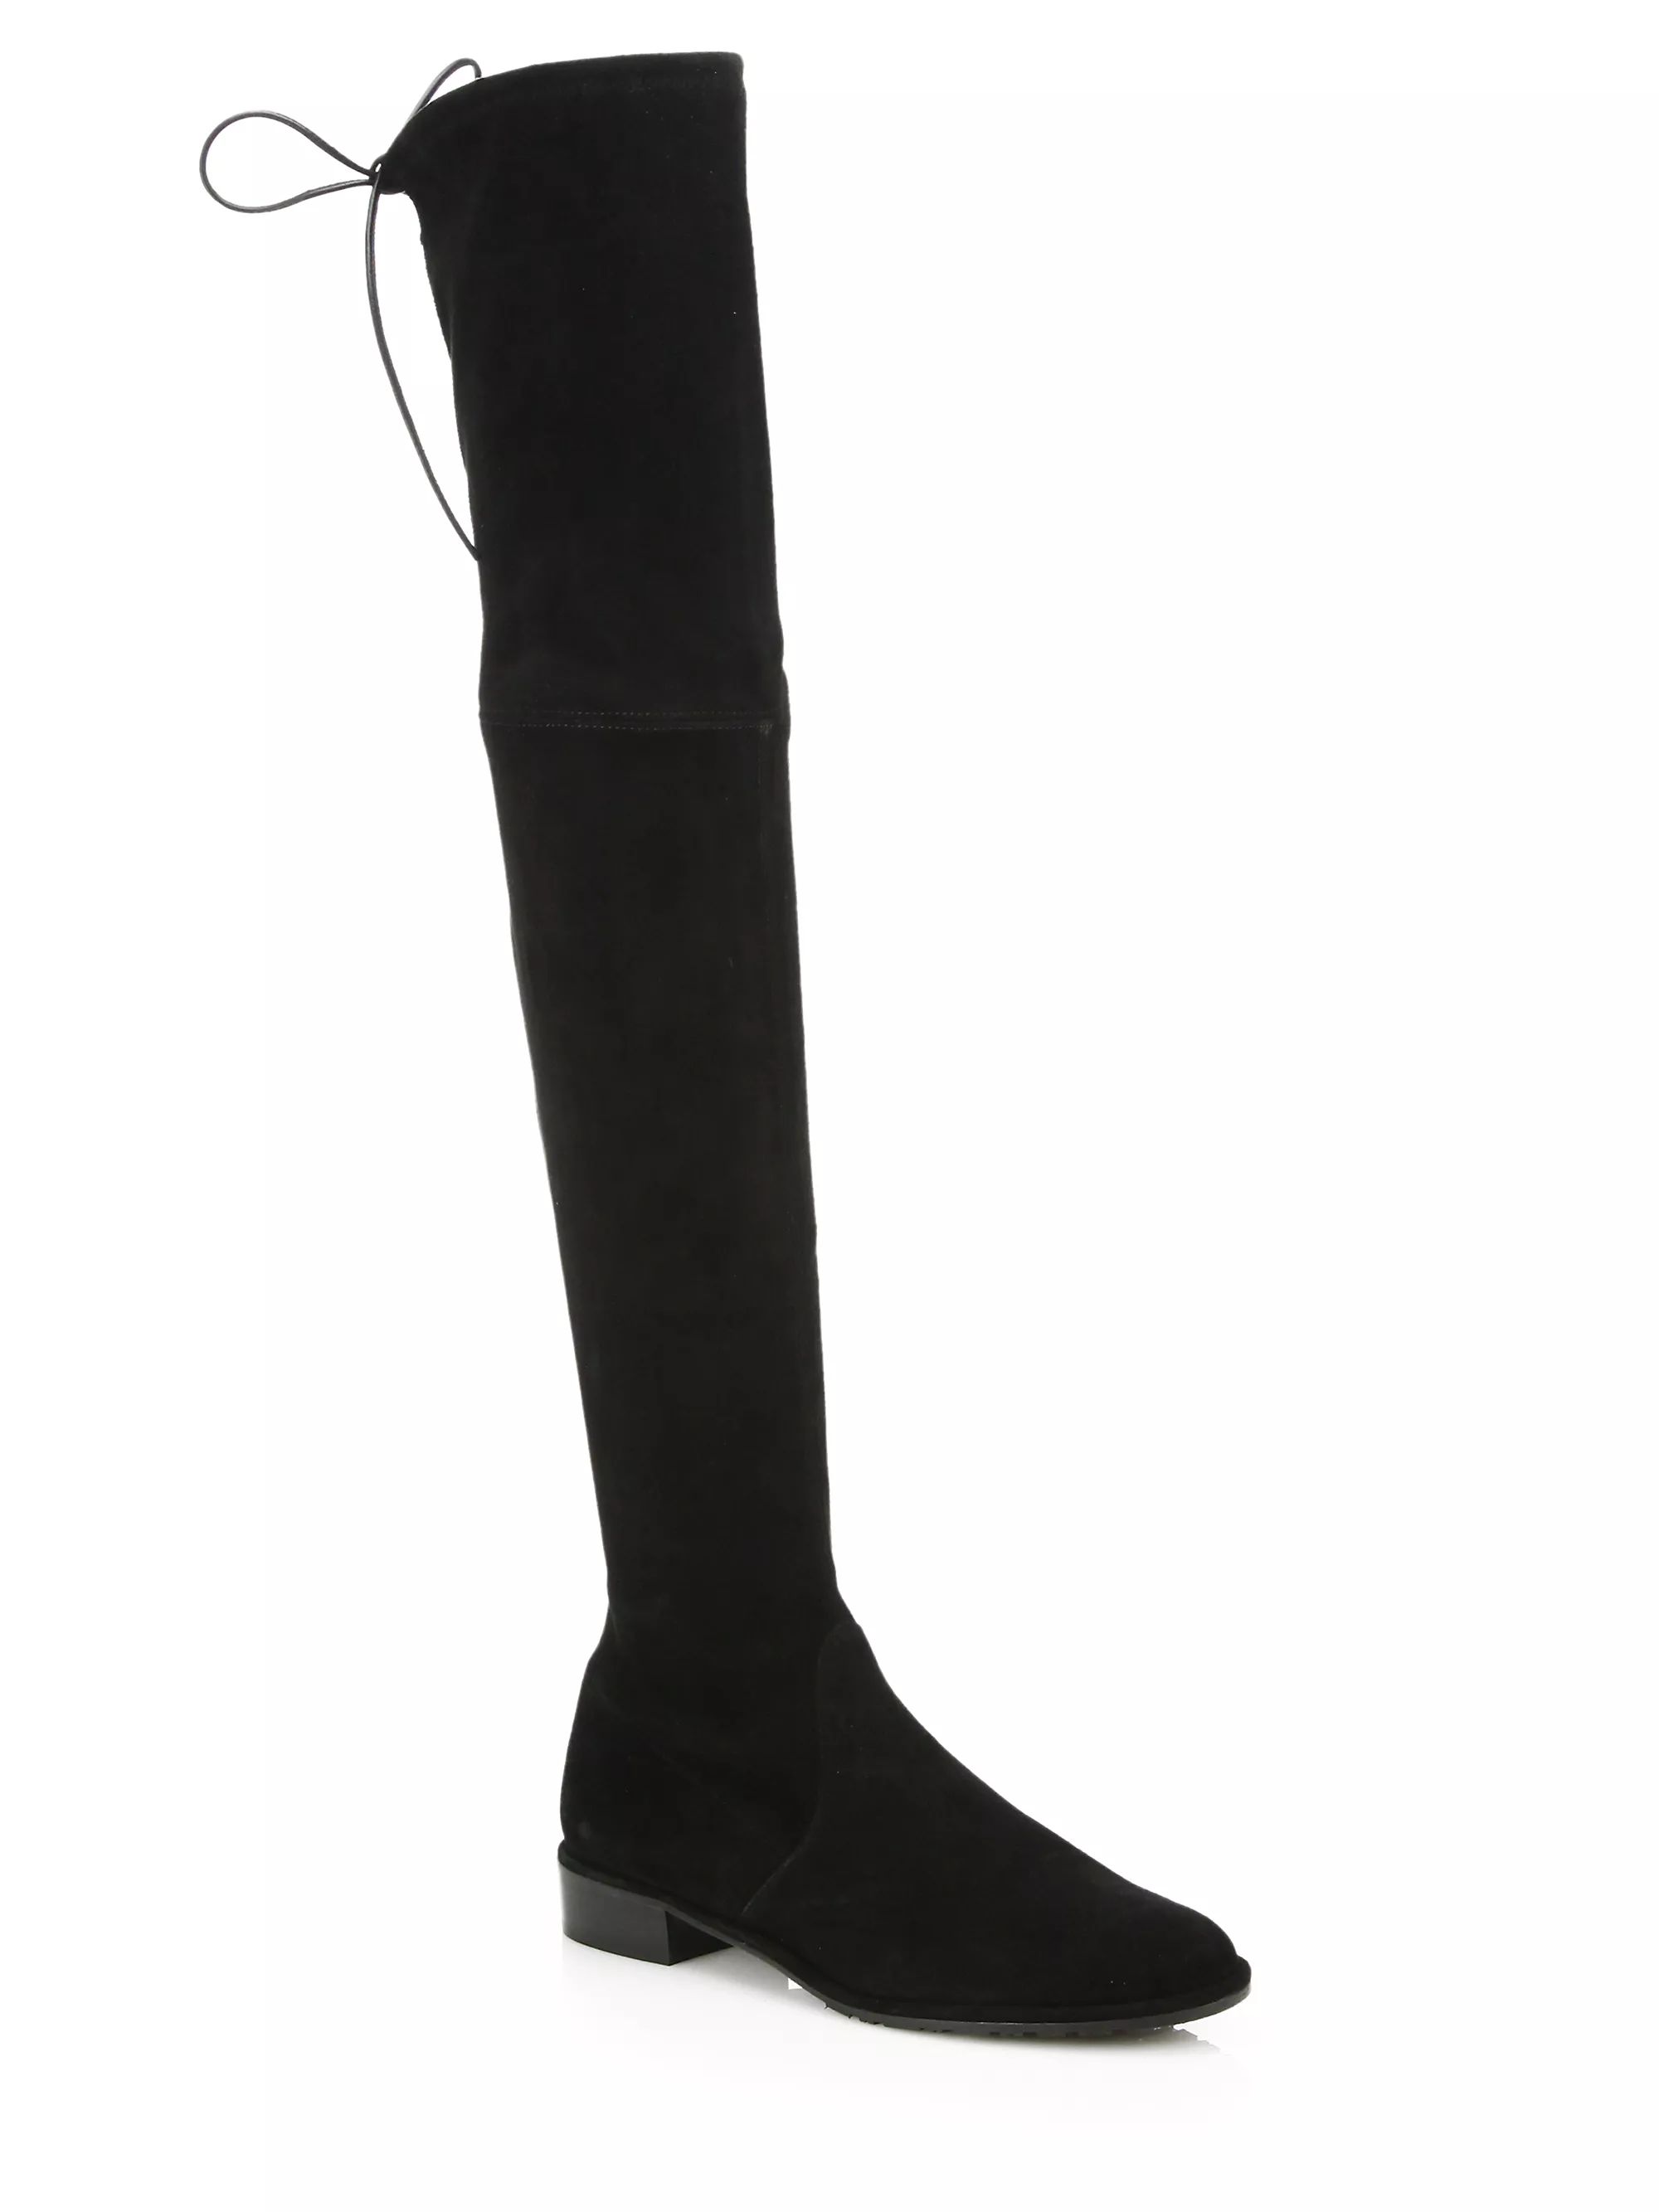 Stuart WeitzmanLowland Suede Thigh-High BootsRating: 5 out of 5 stars1 | Saks Fifth Avenue